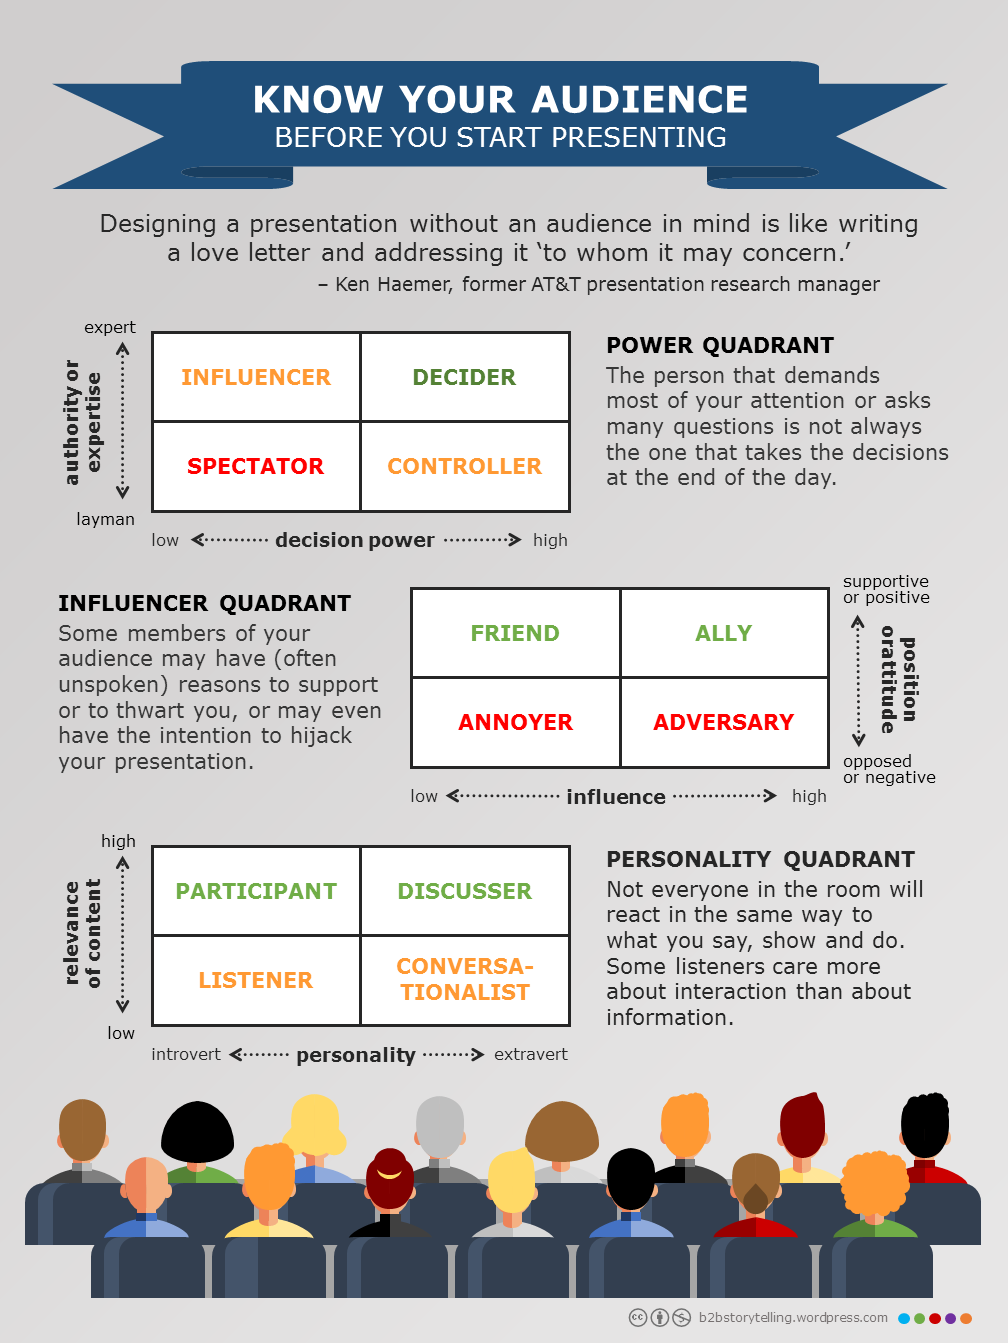 Know your audience infographic L1